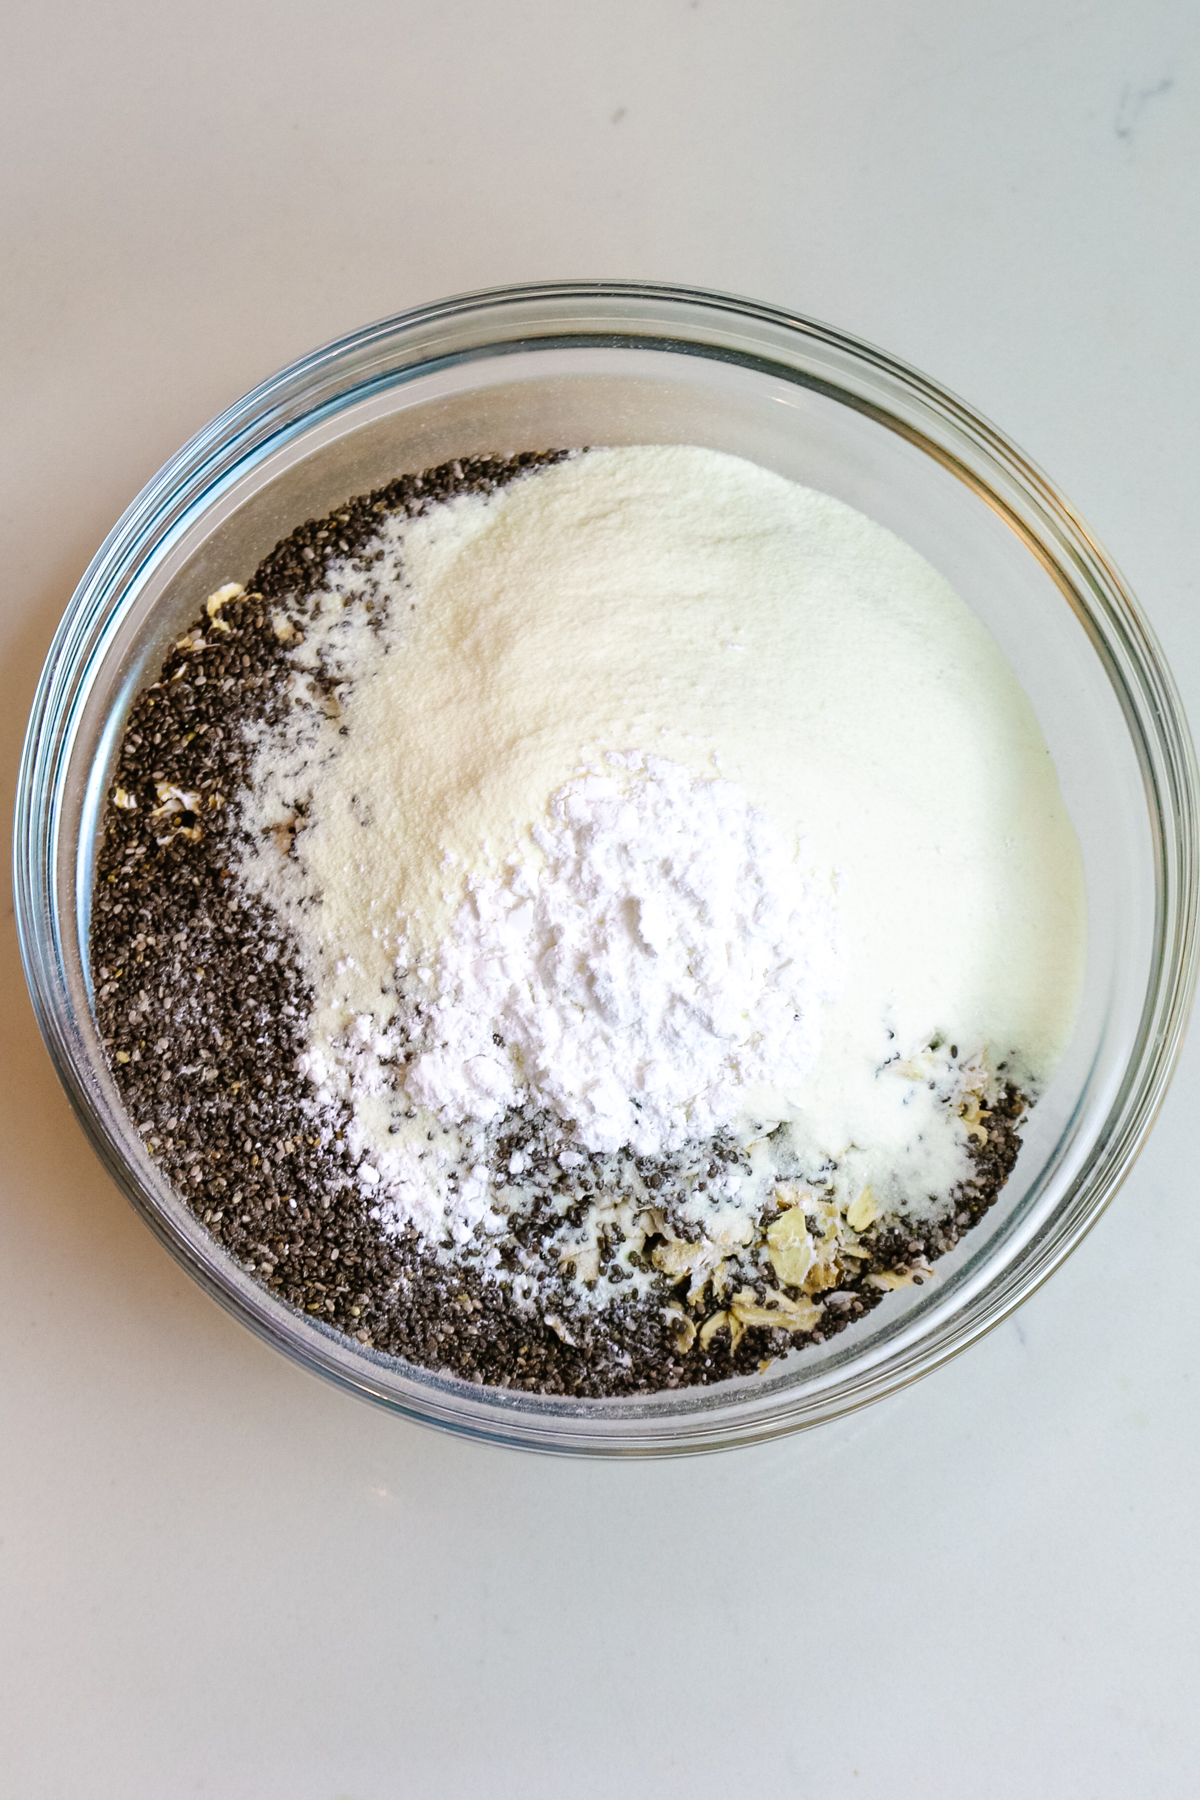 dried ingredients in a glass bowl including baking powder, oats, chia seeds, and collagen powder.